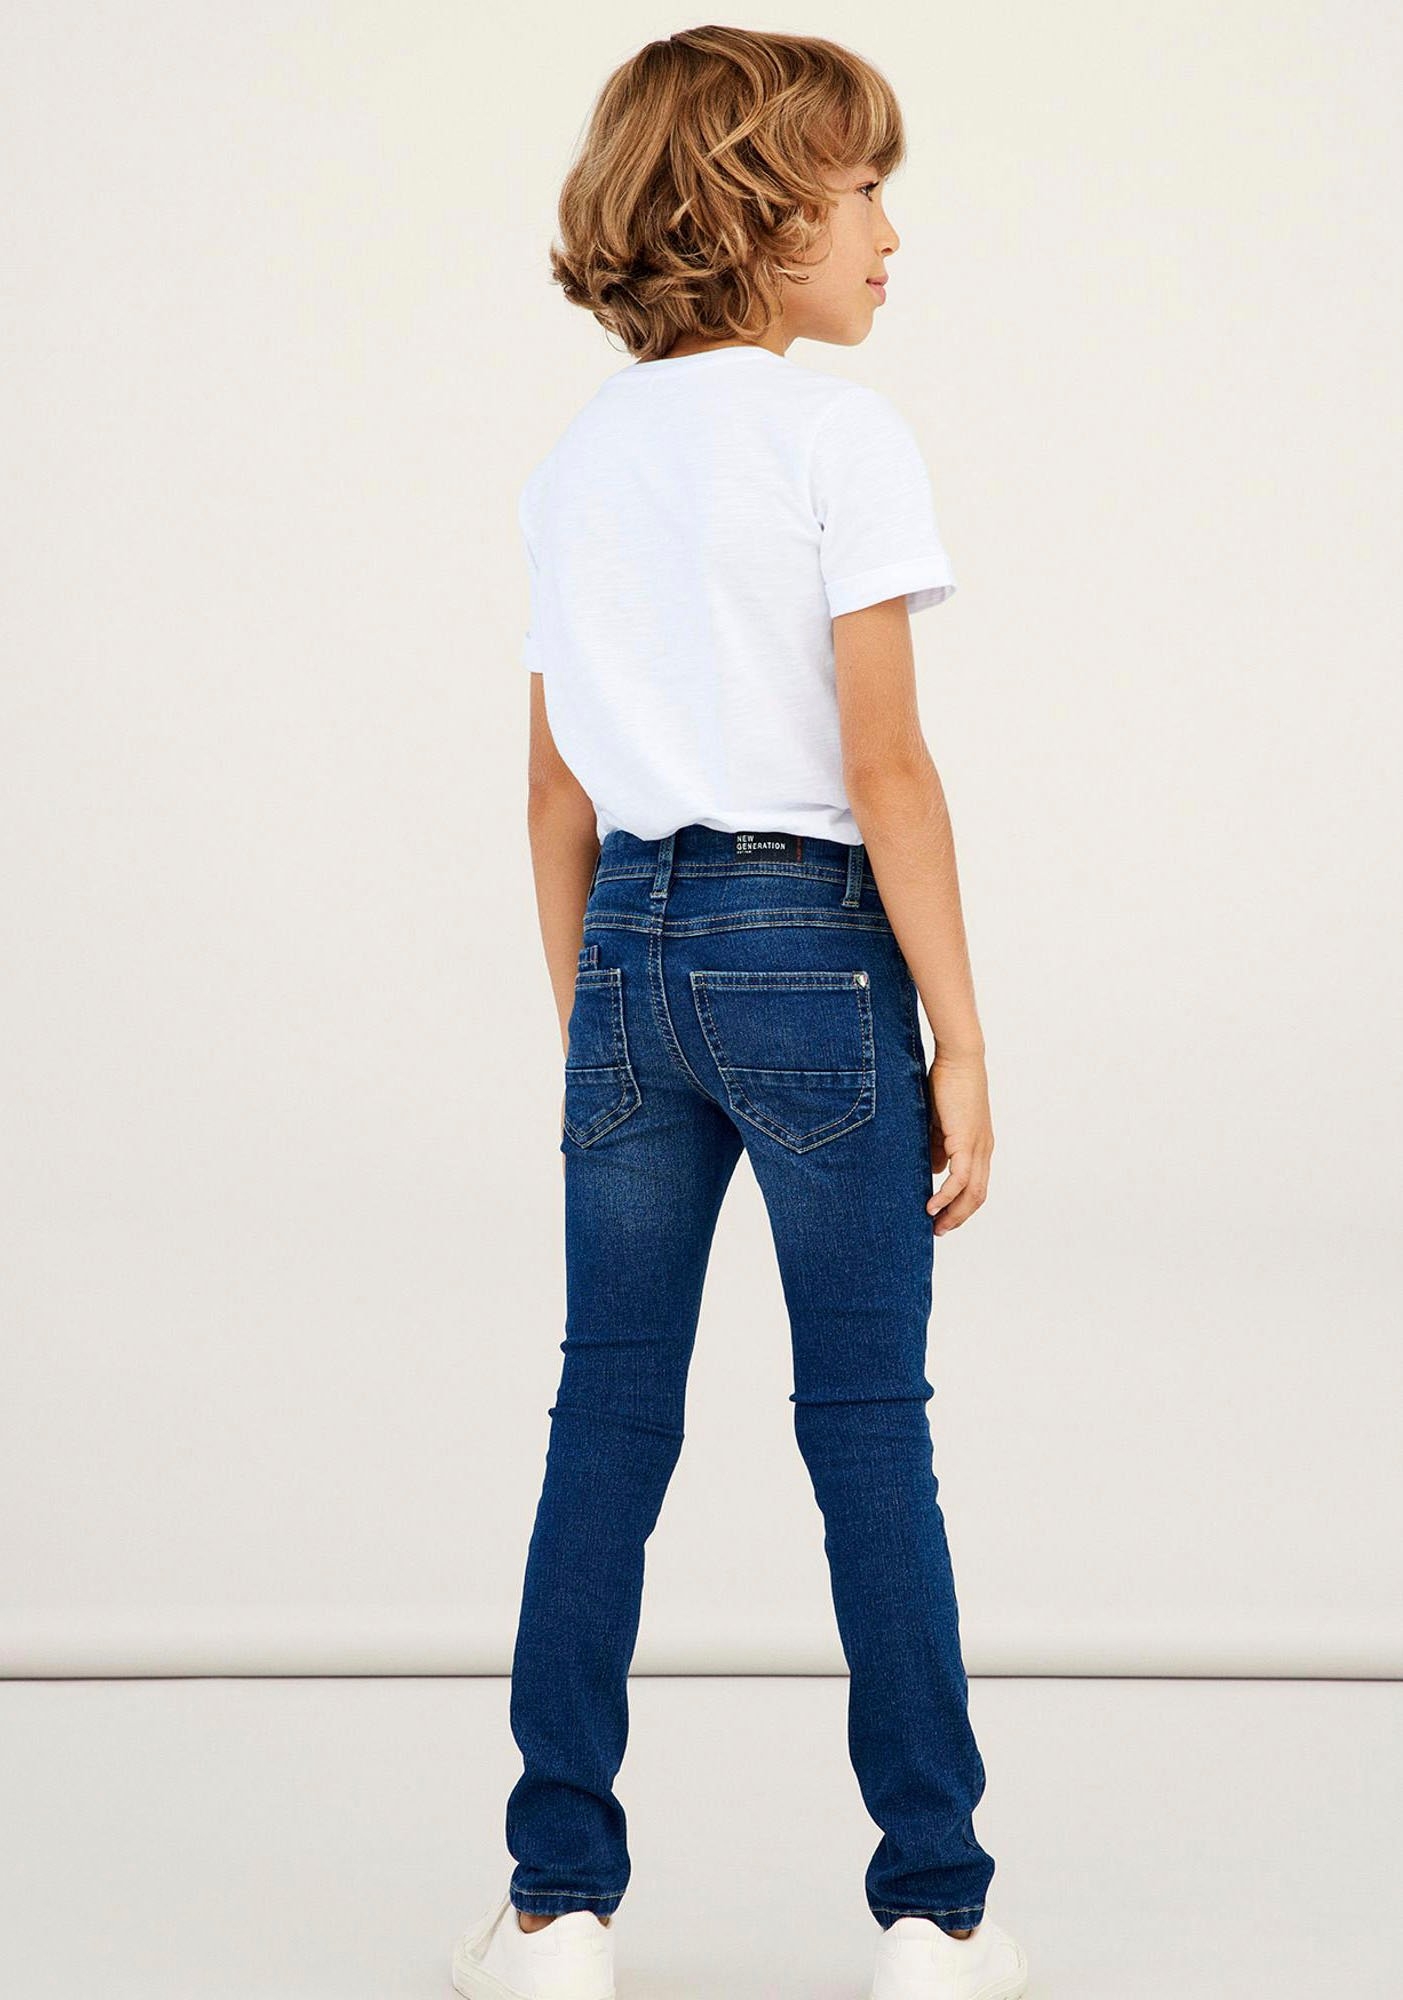 jeans de | DNMTAUL Stretch 3618 shop PANT online It Name OTTO NKMTHEO in